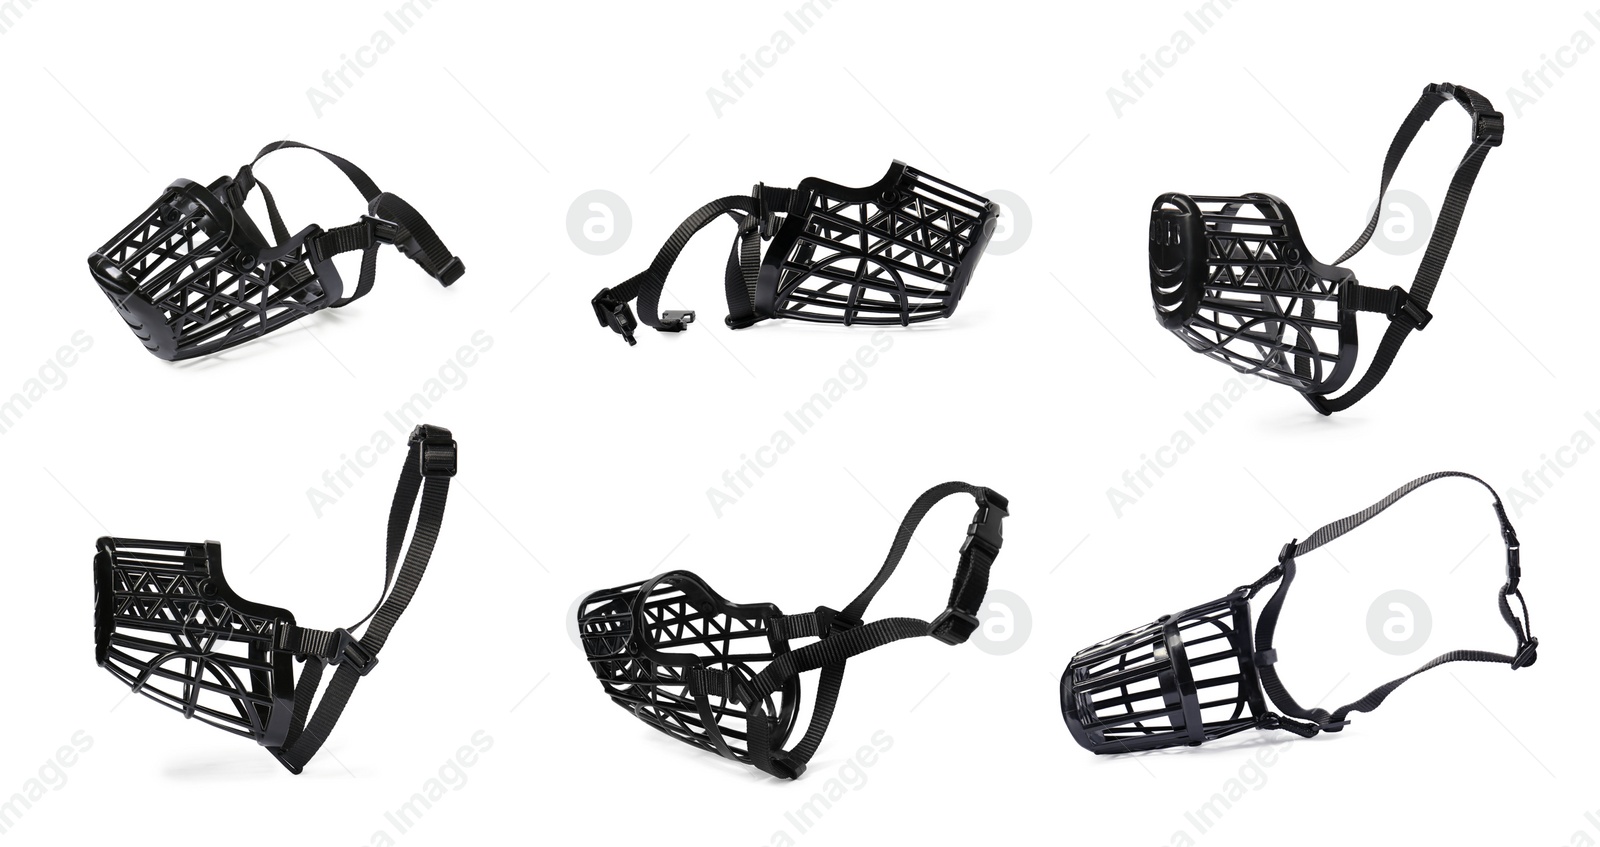 Image of Collage with black plastic dog muzzle on white background, different sides